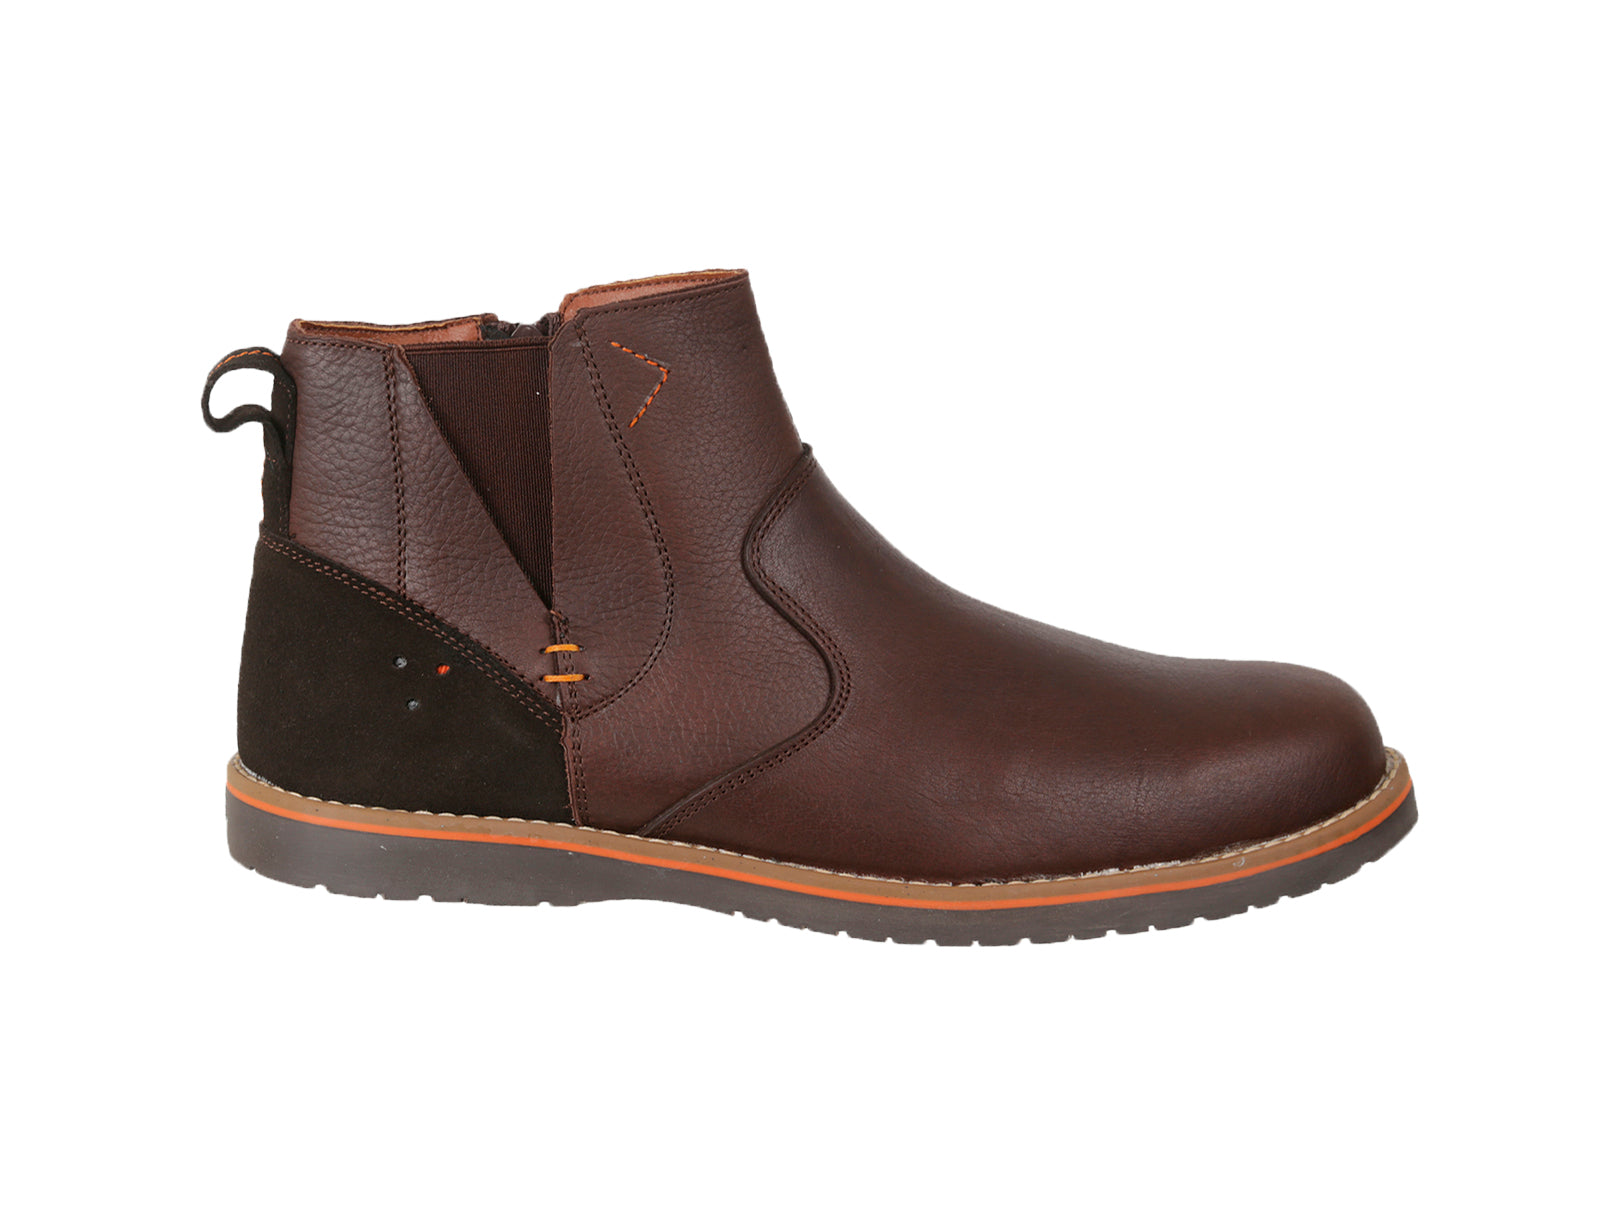 Leather boots brown low ankle